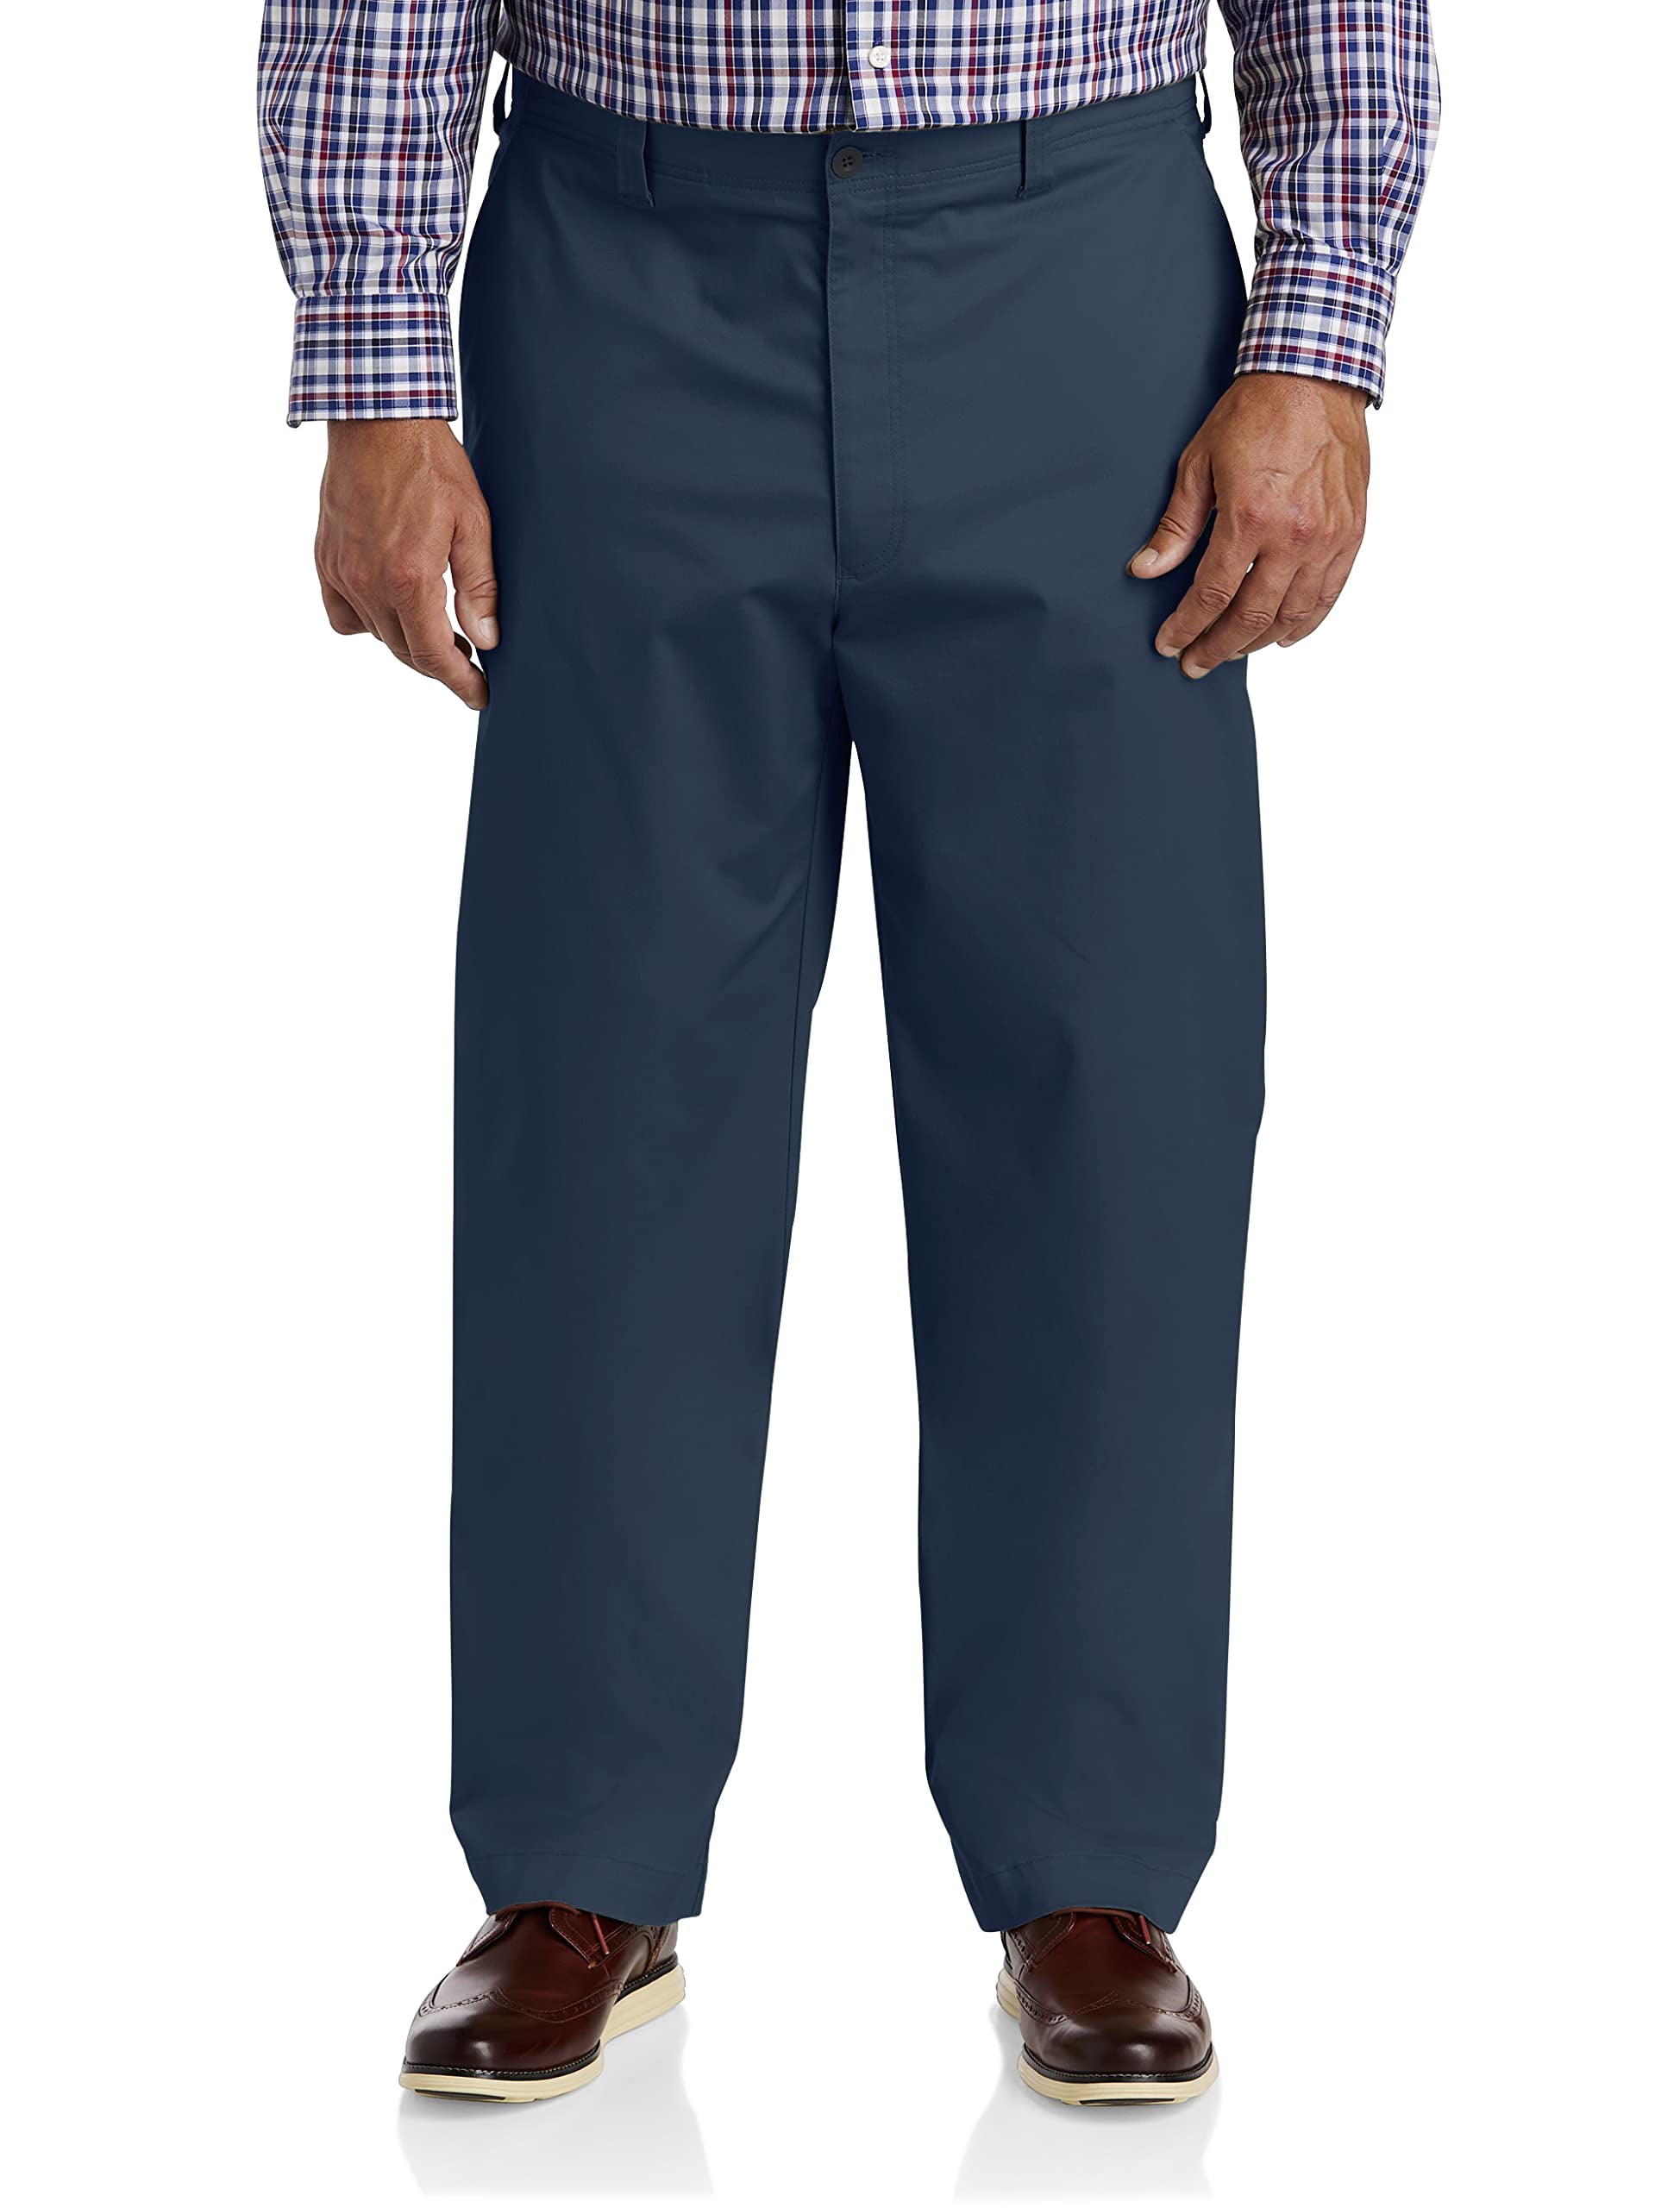 Oak Hill by DXL Men's Big and Tall Straight-Fit Tech Pants